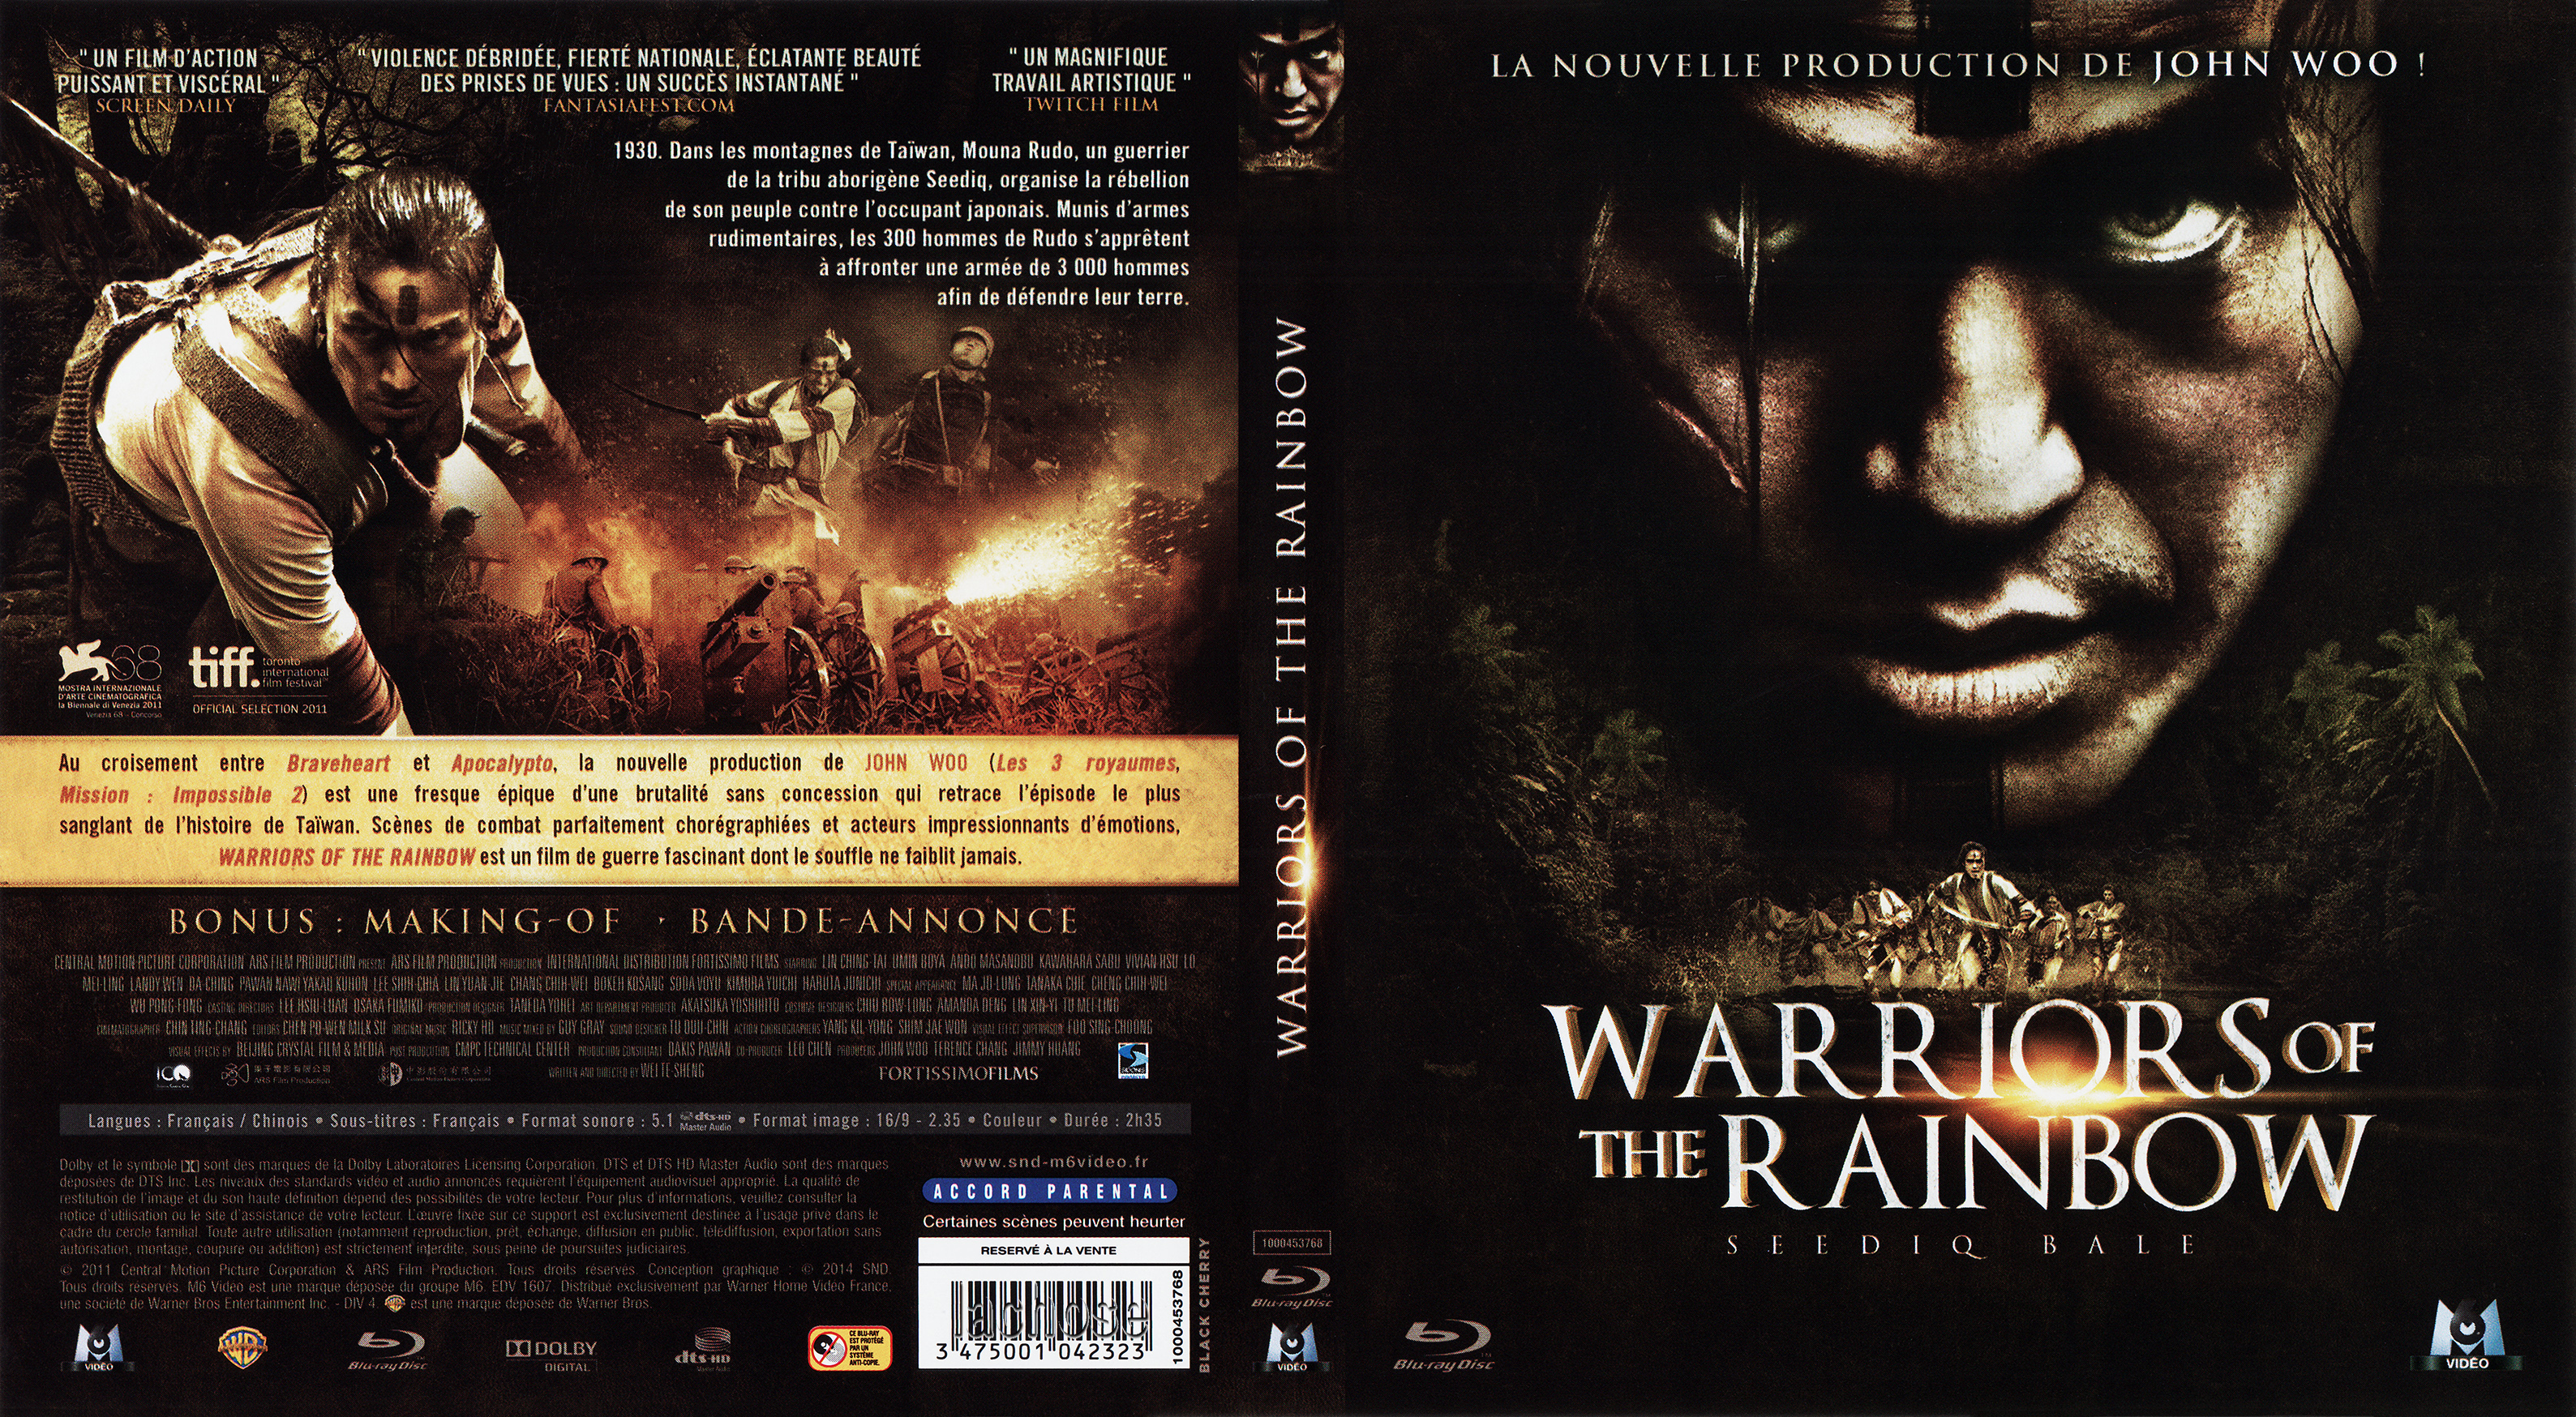 Jaquette DVD Warriors of the rainbow (BLU-RAY)